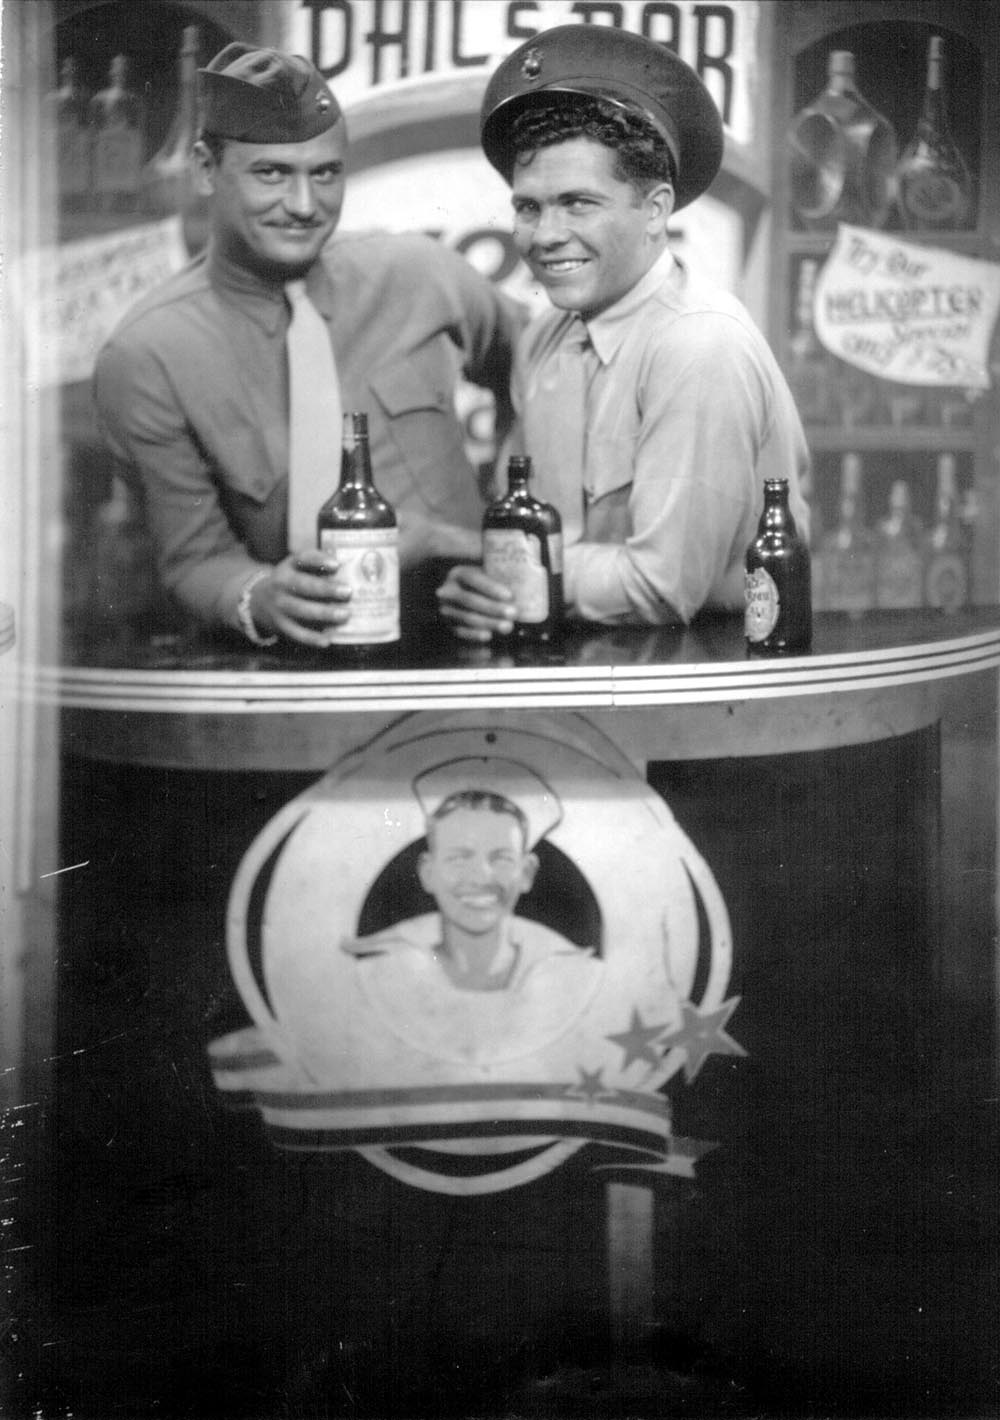 Kenneth Bell (left) during WWII. Exact date and location unknown. Kenneth married Joyce Blackburn.